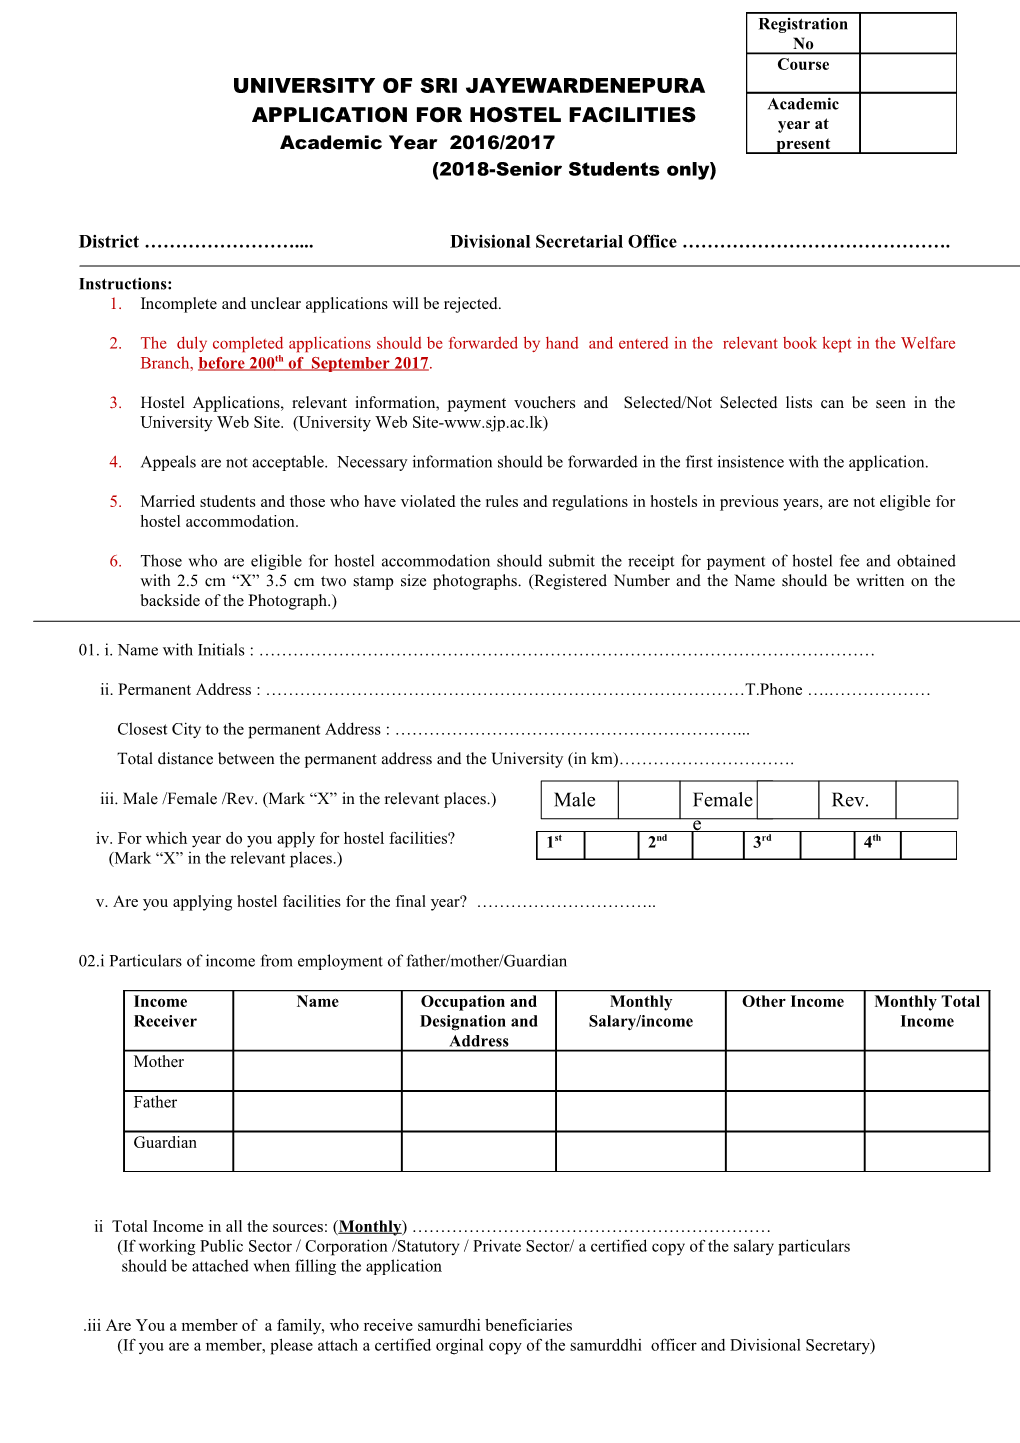 Application for Hostel Facilities